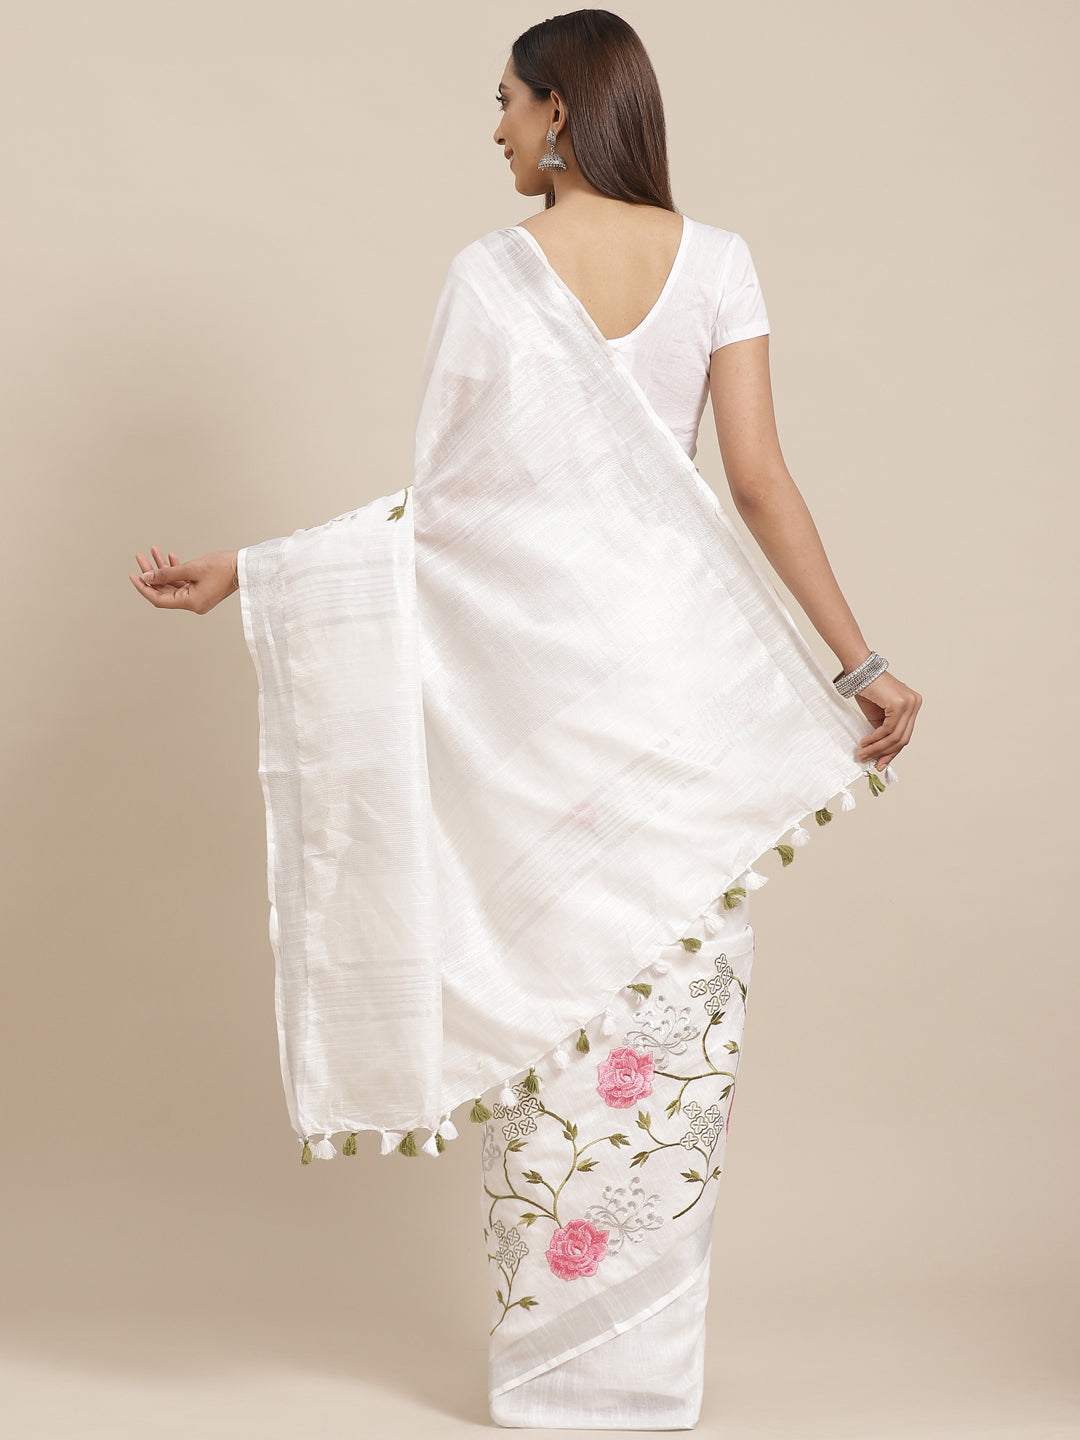 White and Green, Kalakari India Linen Handwoven Saree and Blouse ALBGSA0086-Saree-Kalakari India-ALBGSA0086-Cotton, Geographical Indication, Hand Crafted, Heritage Prints, Linen, Natural Dyes, Red, Sarees, Shibori, Sustainable Fabrics, Woven, Yellow-[Linen,Ethnic,wear,Fashionista,Handloom,Handicraft,Indigo,blockprint,block,print,Cotton,Chanderi,Blue, latest,classy,party,bollywood,trendy,summer,style,traditional,formal,elegant,unique,style,hand,block,print, dabu,booti,gift,present,glamorous,affor